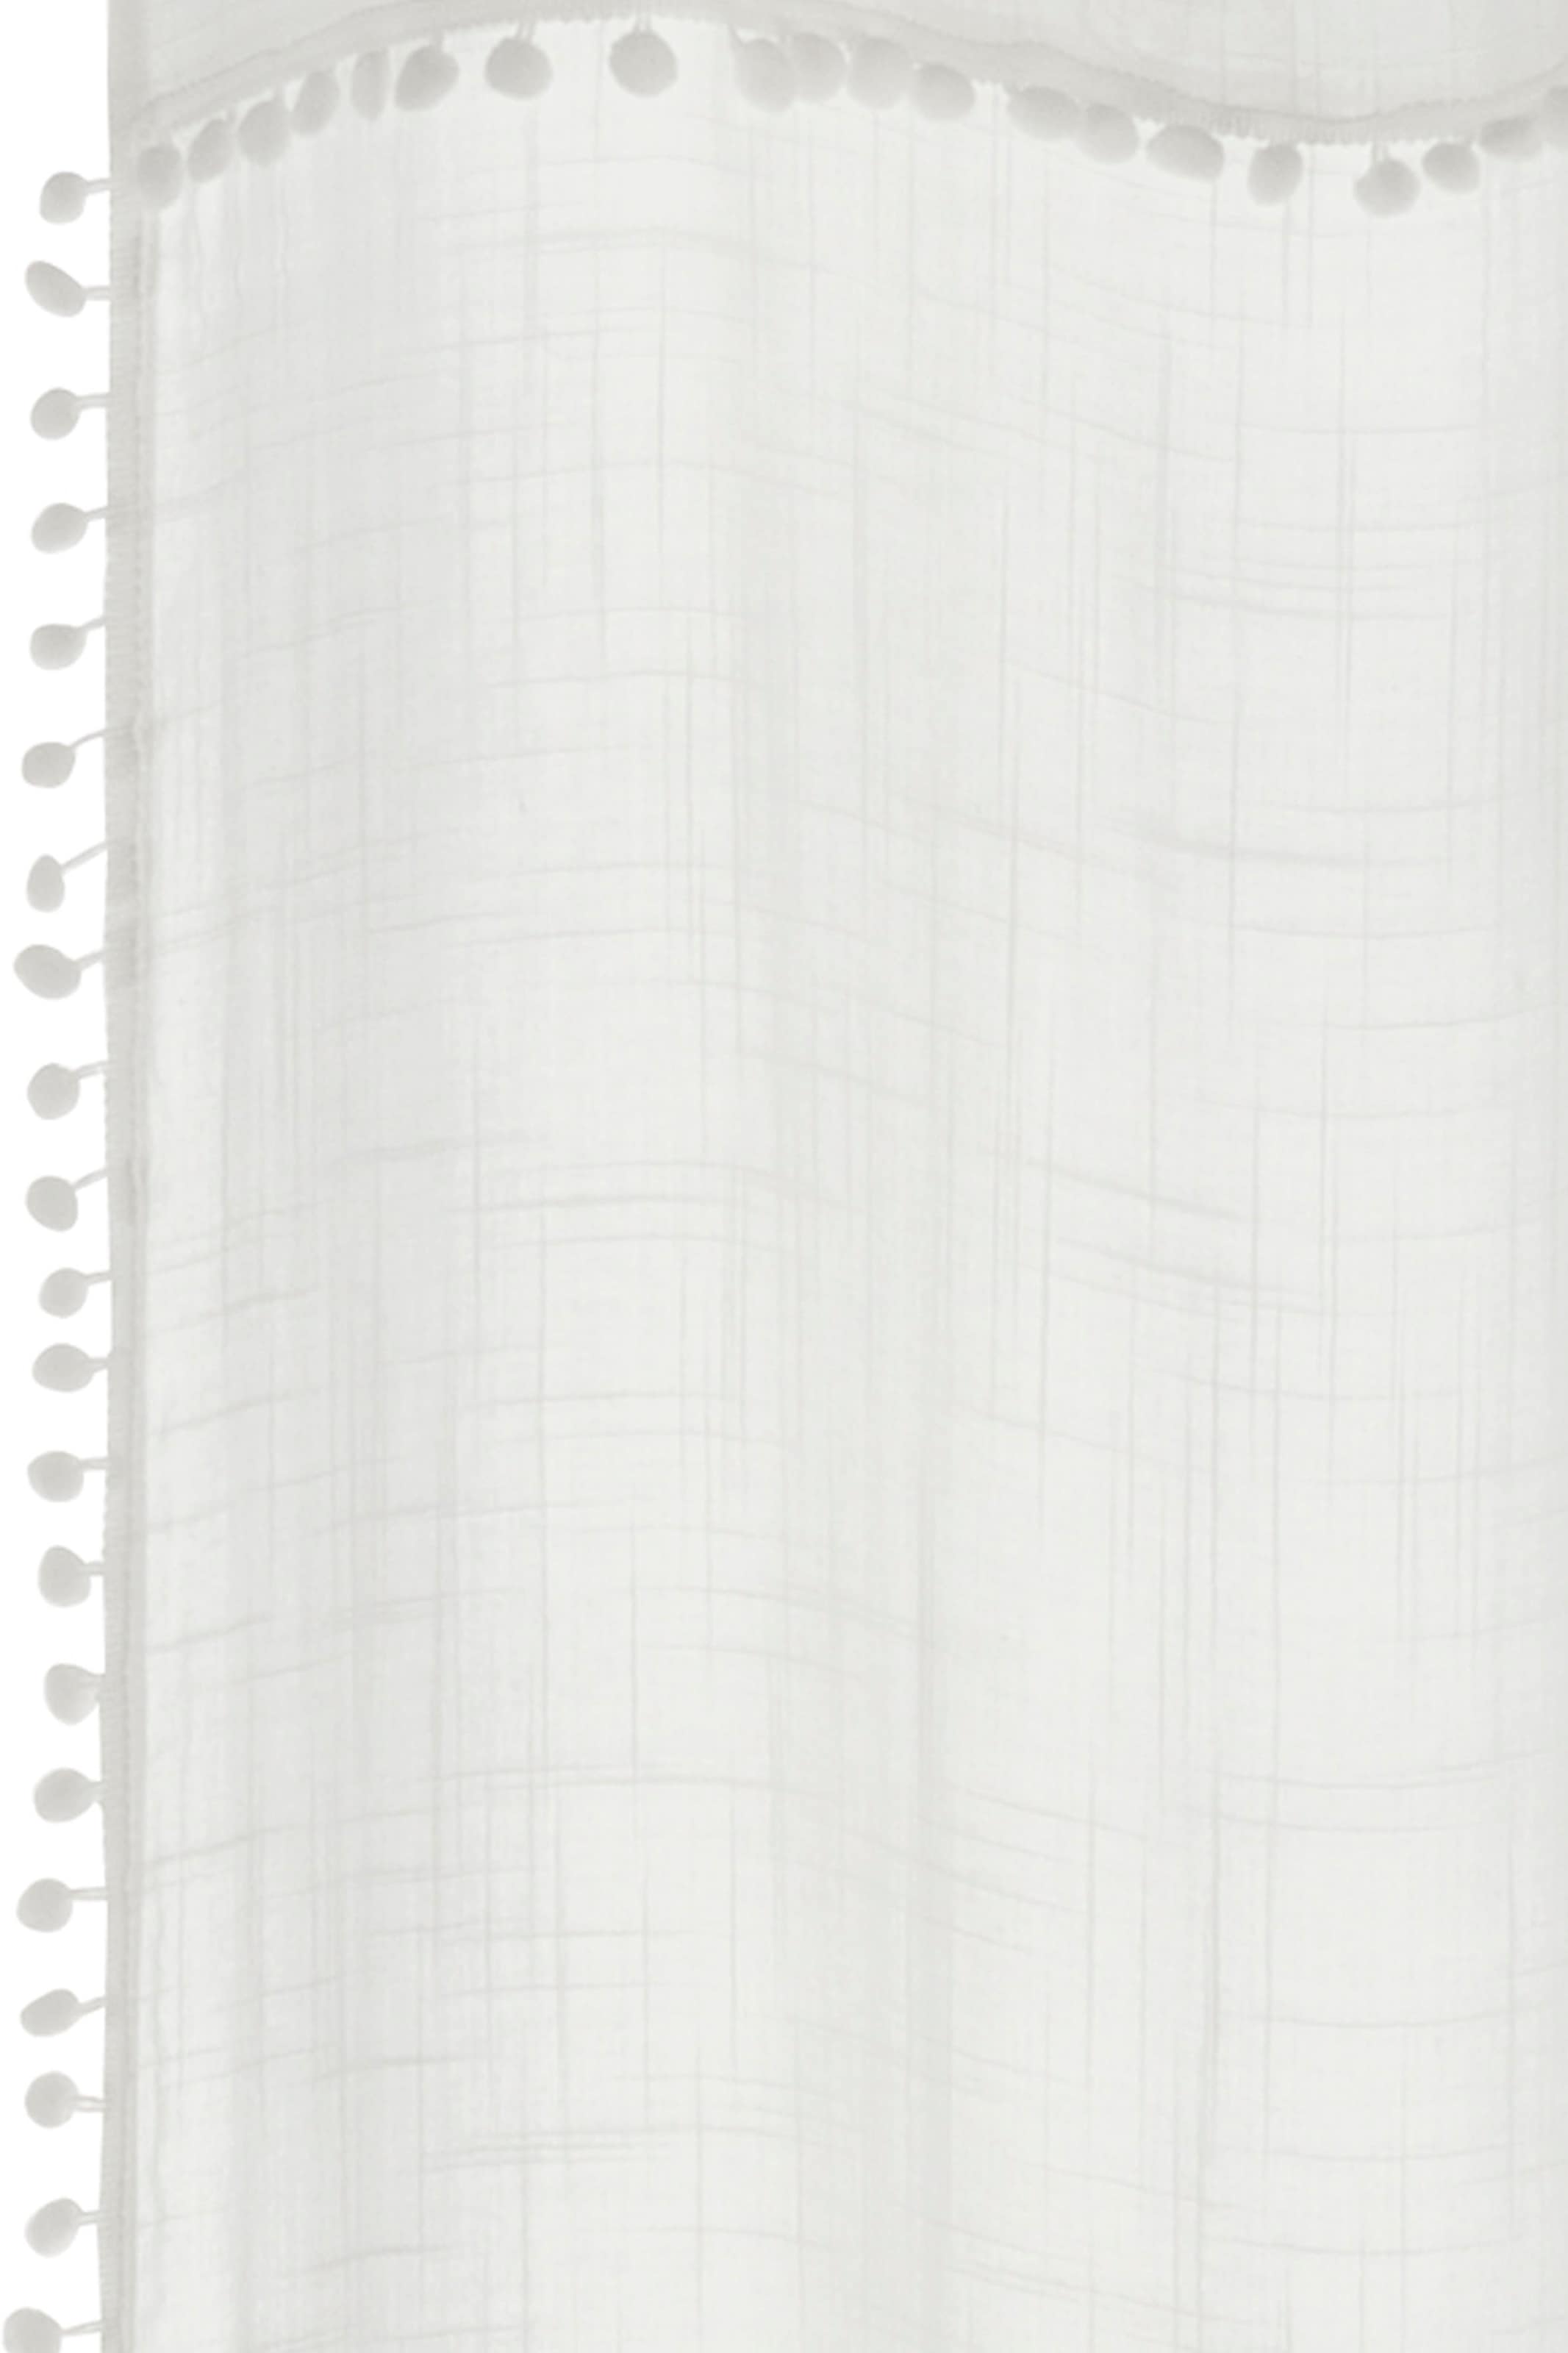 freundin Home Collection Gardine (1 00 »Natural OTTO offwhite«, Charme St.) bei